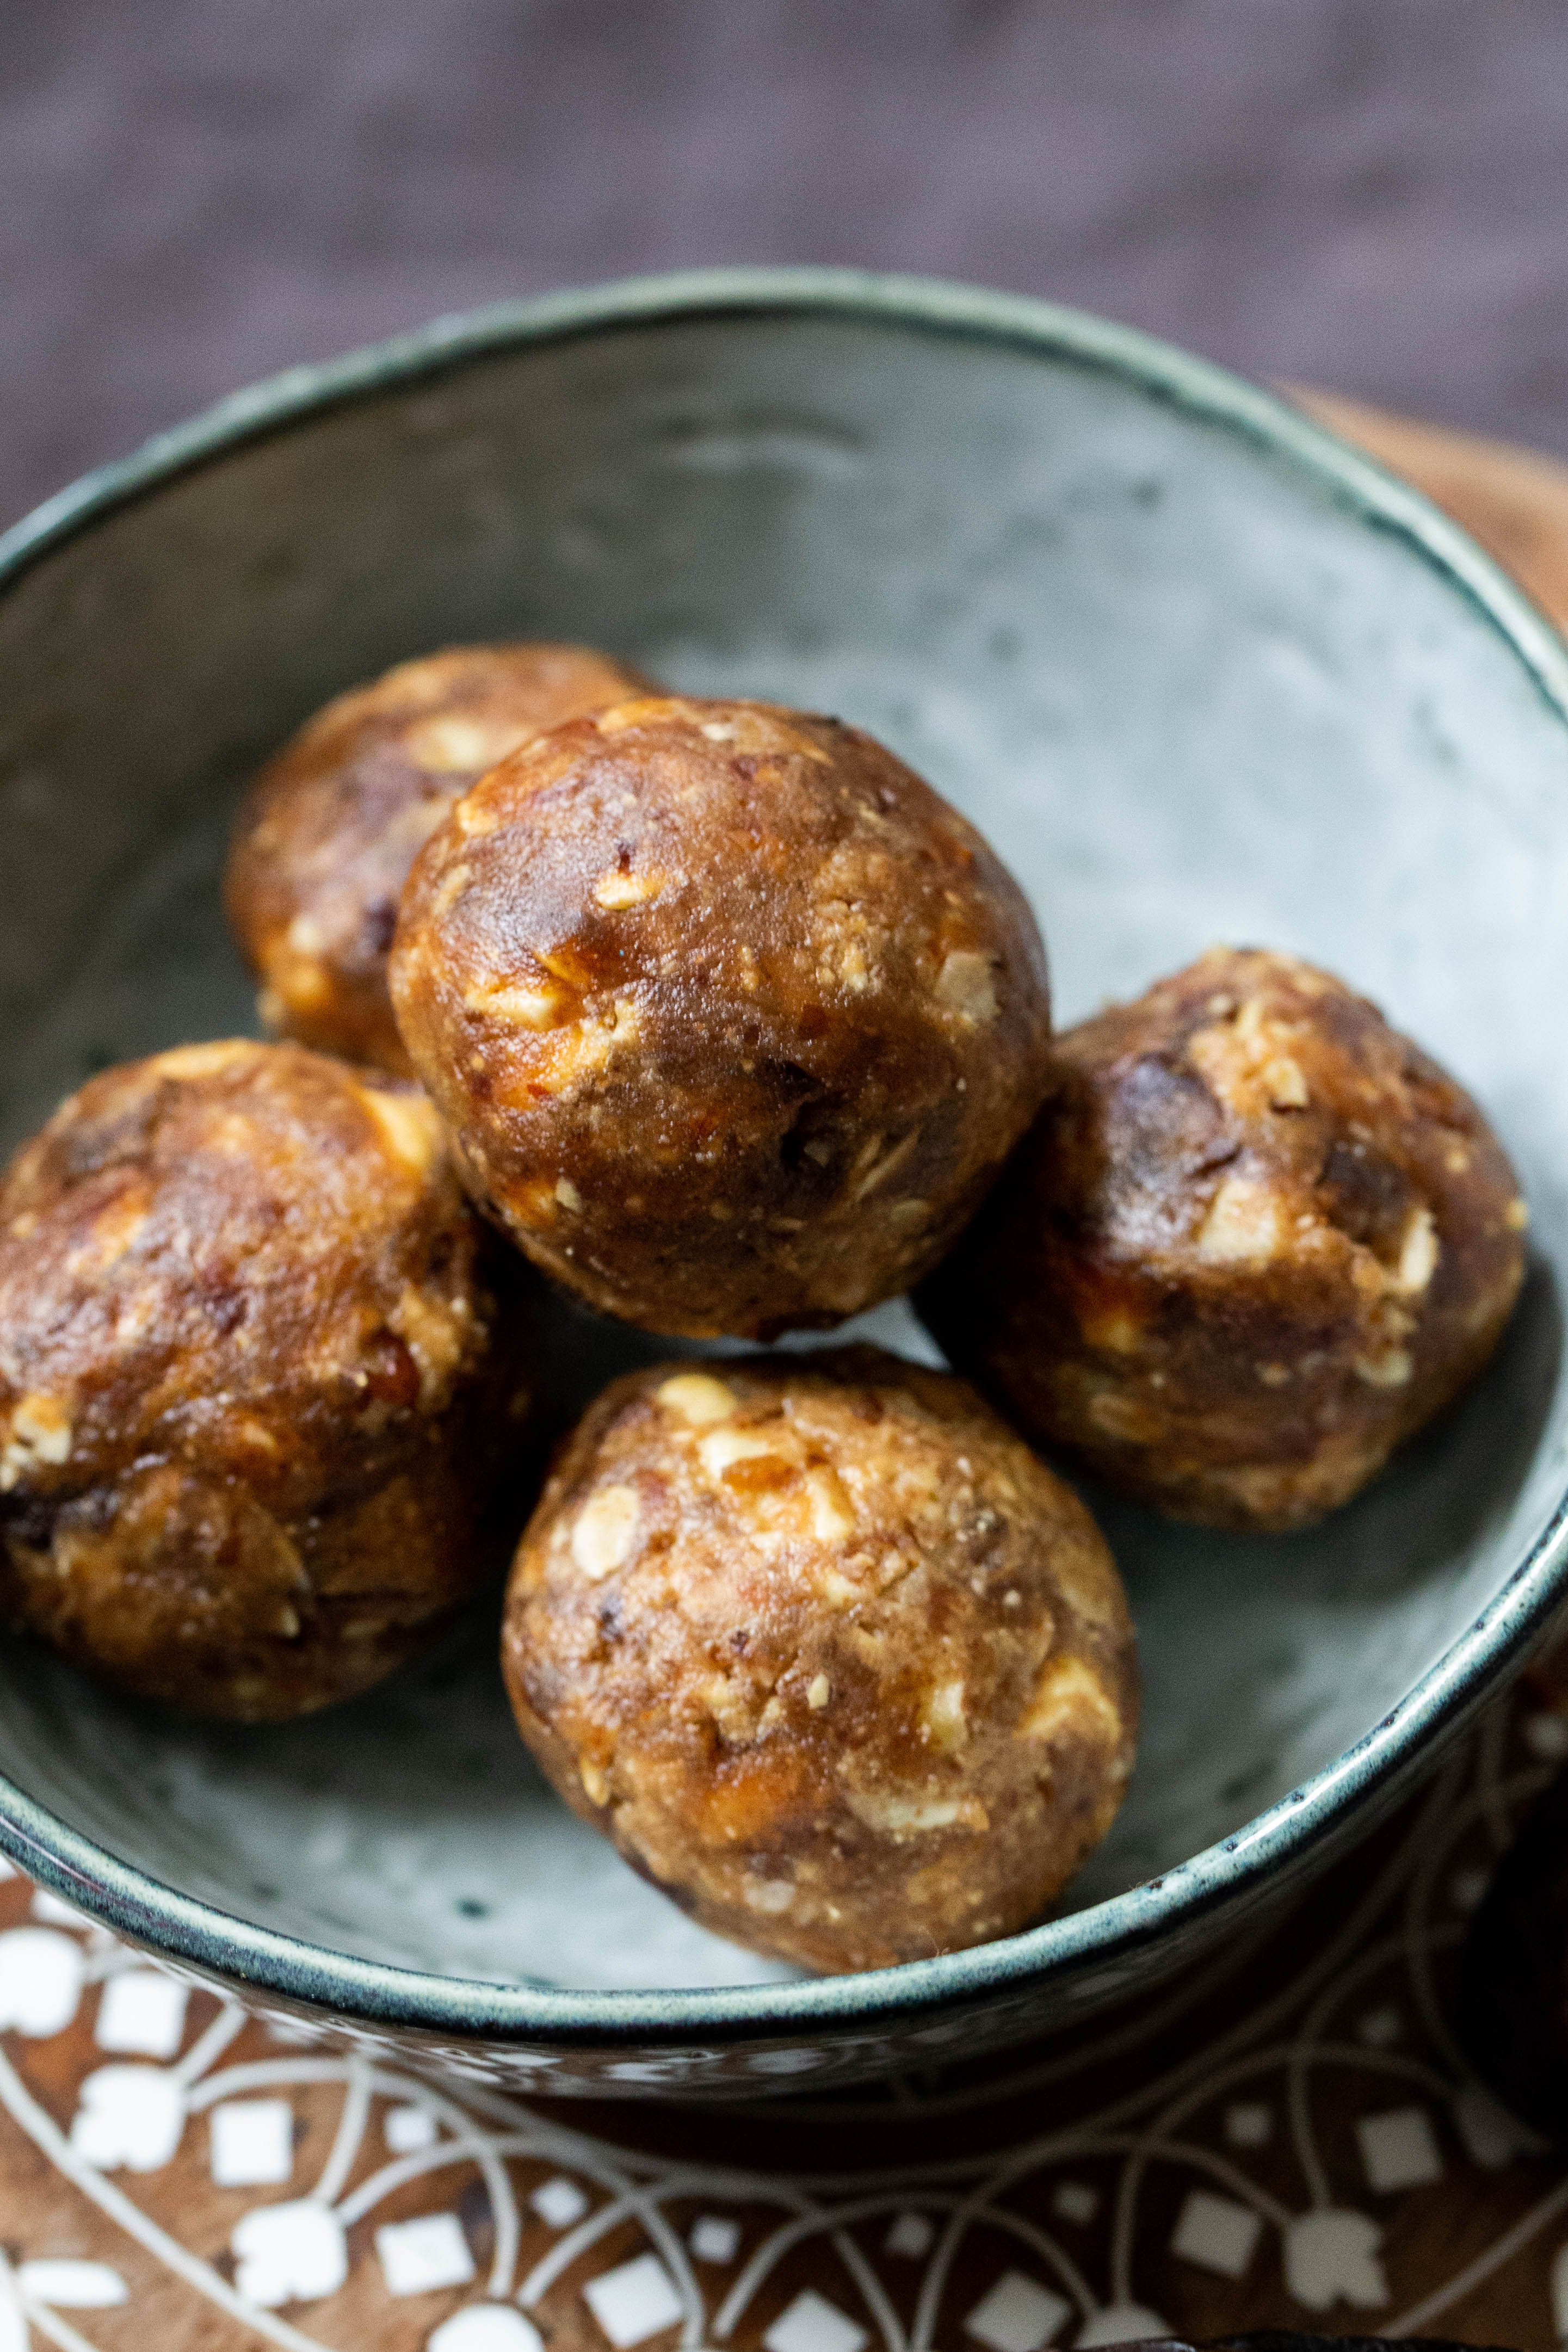 Date and Peanut Butter Balls in a small blue bowl on a patterned wooded circular board